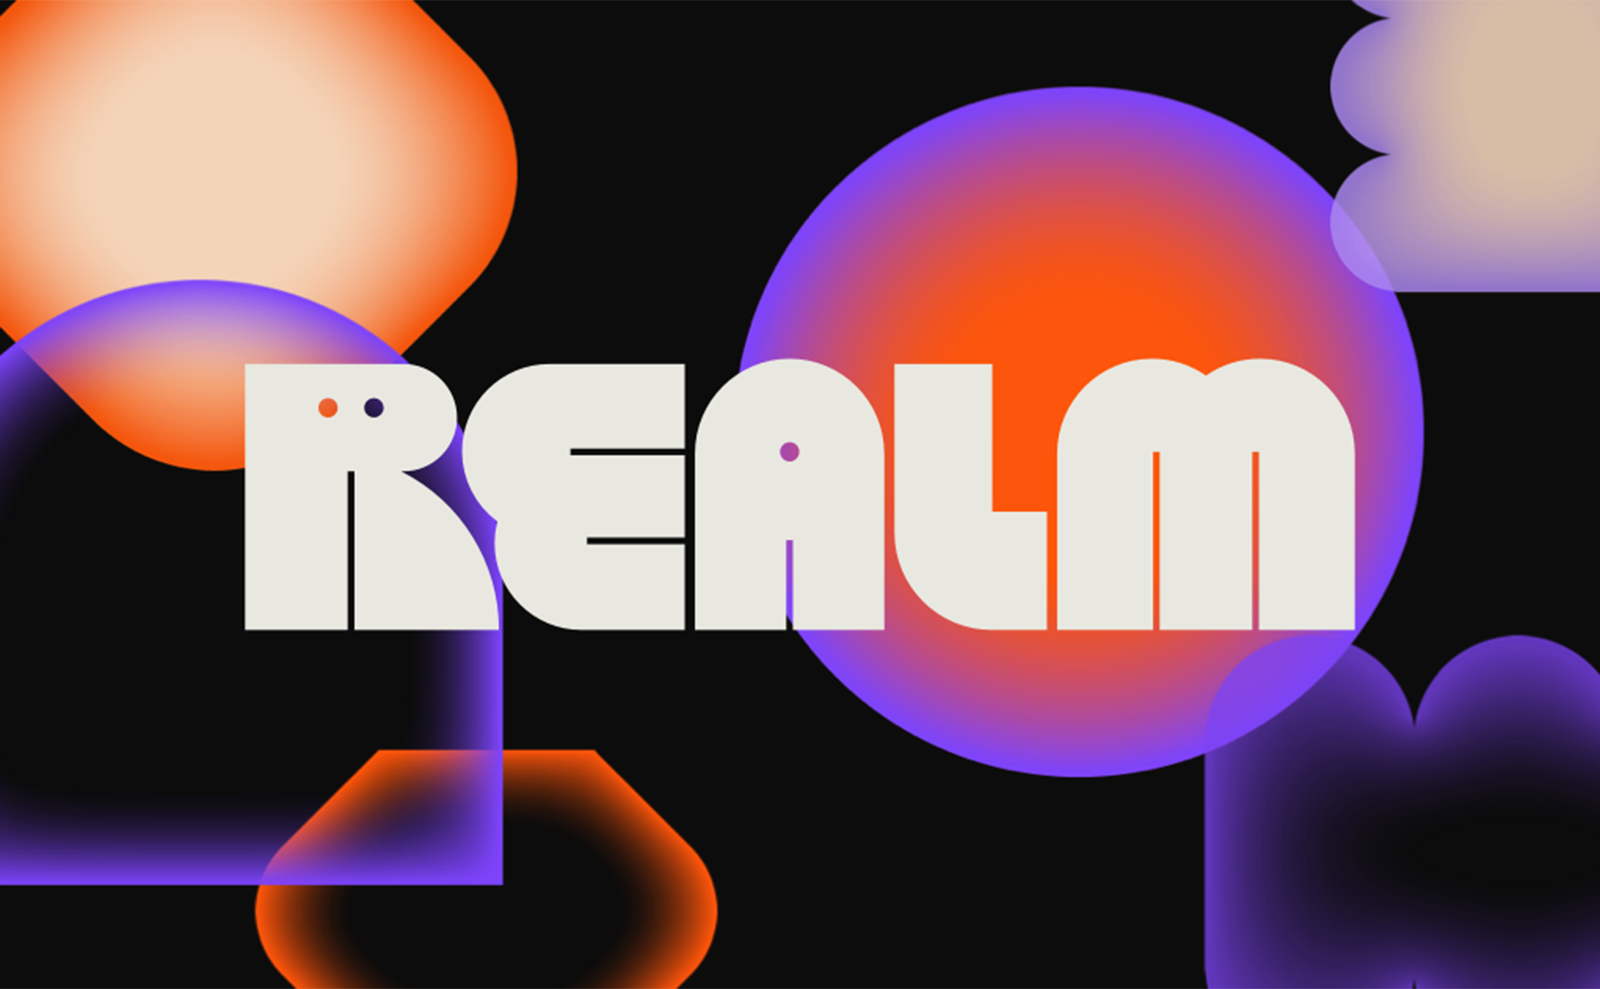  graphic of realm logo in purple and orange on a black background